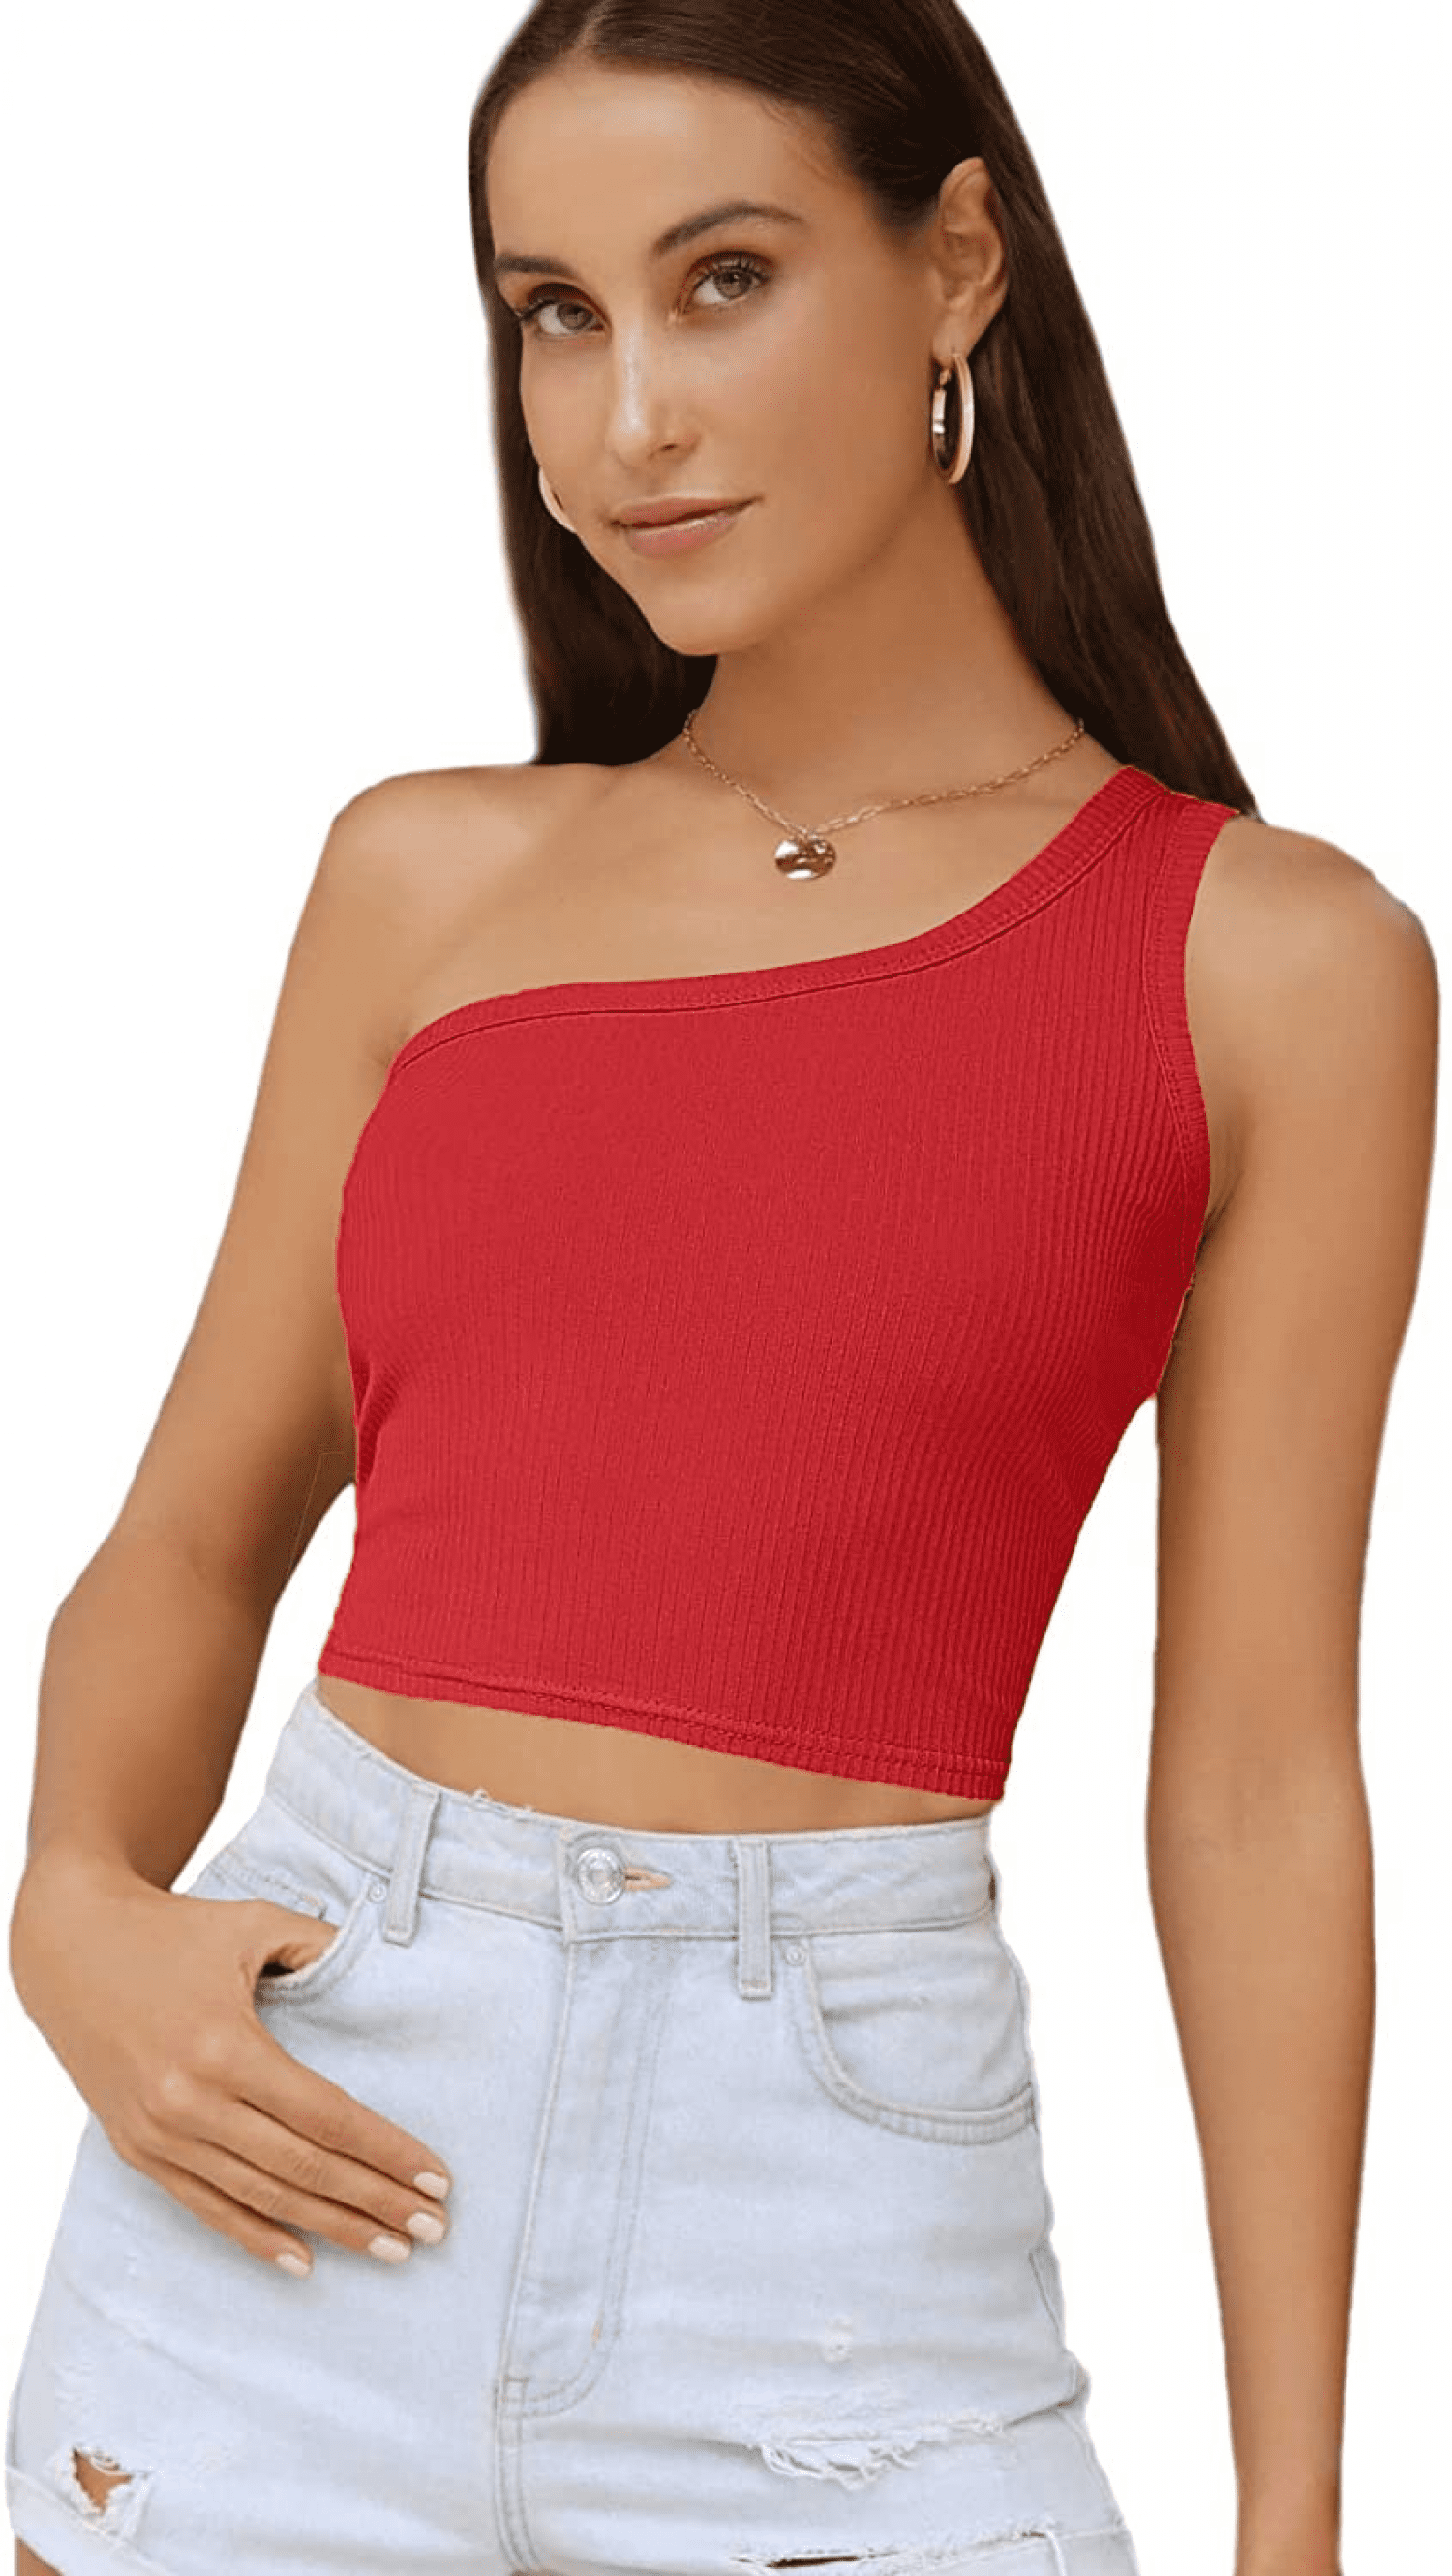 Women's Sexy One Shoulder Sleeveless Ribbed Crop Top, Red (XL) 